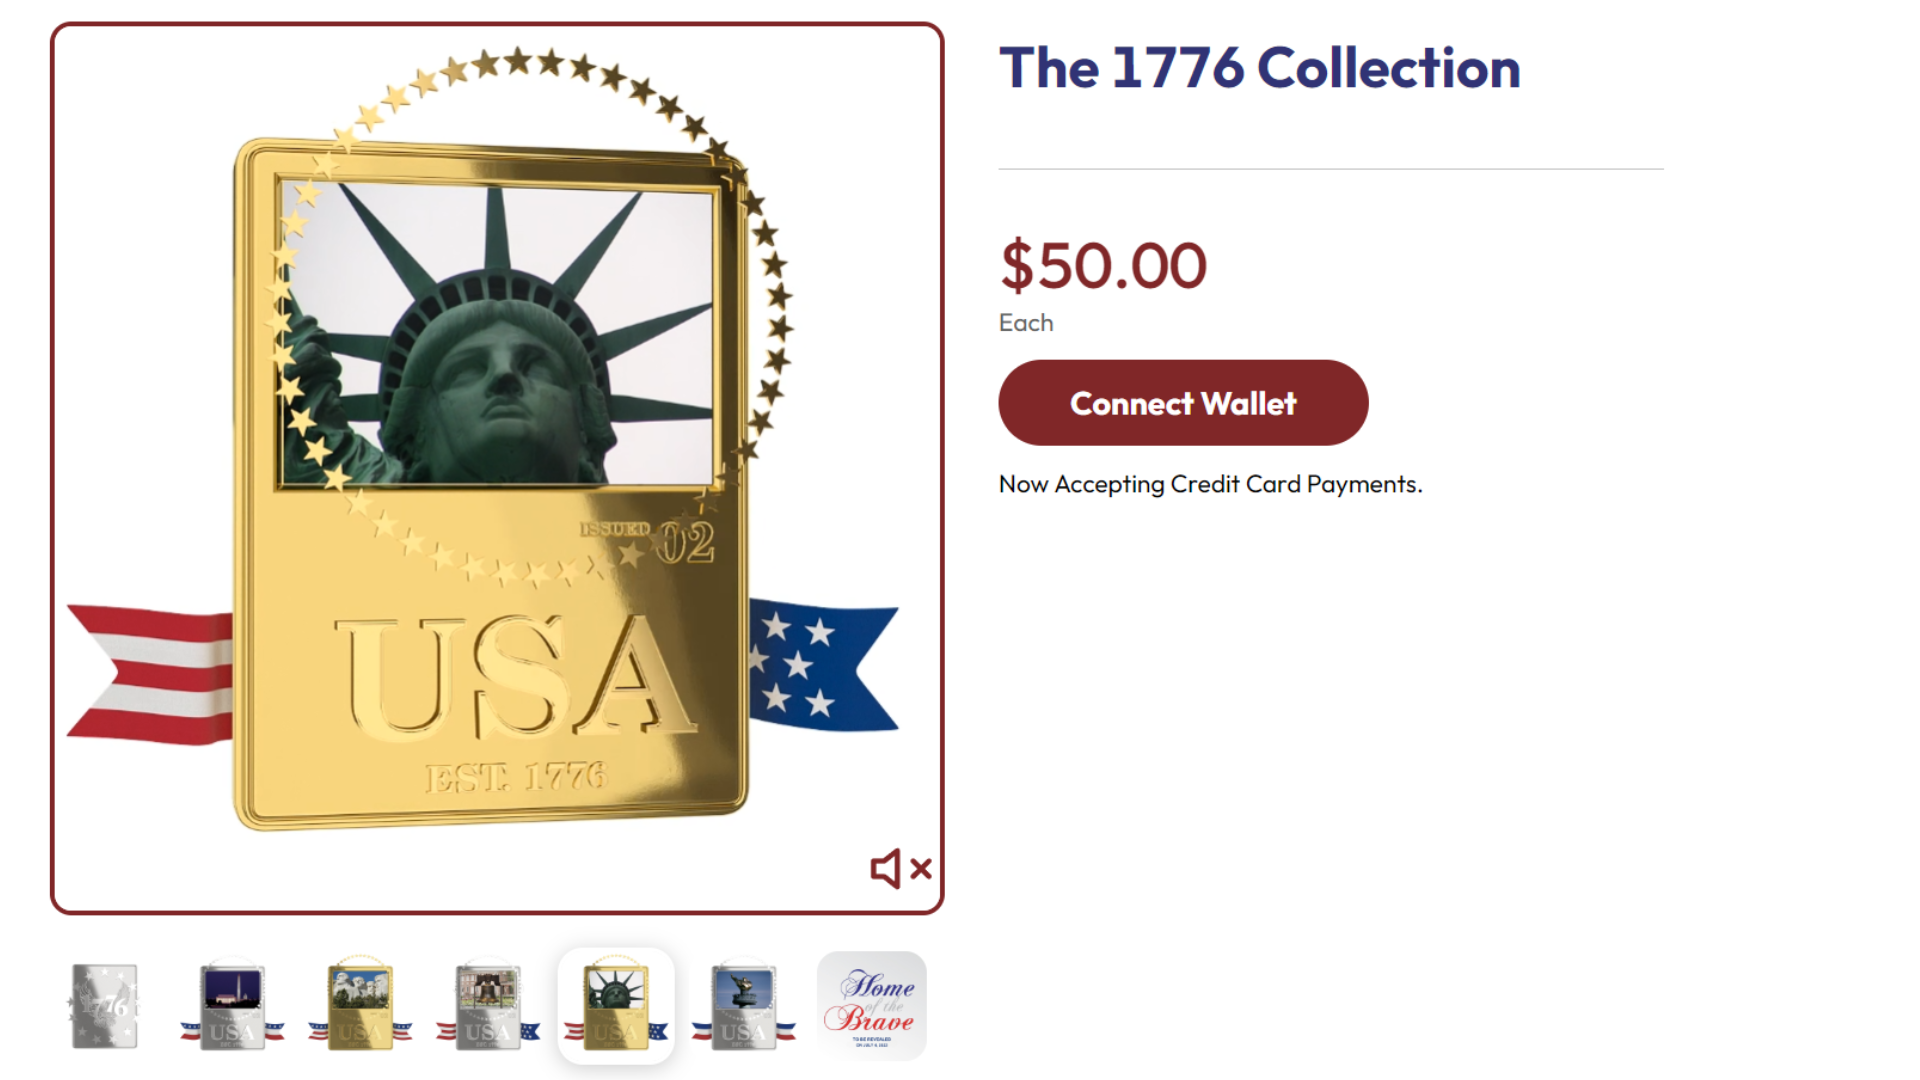 The 1776 Collection